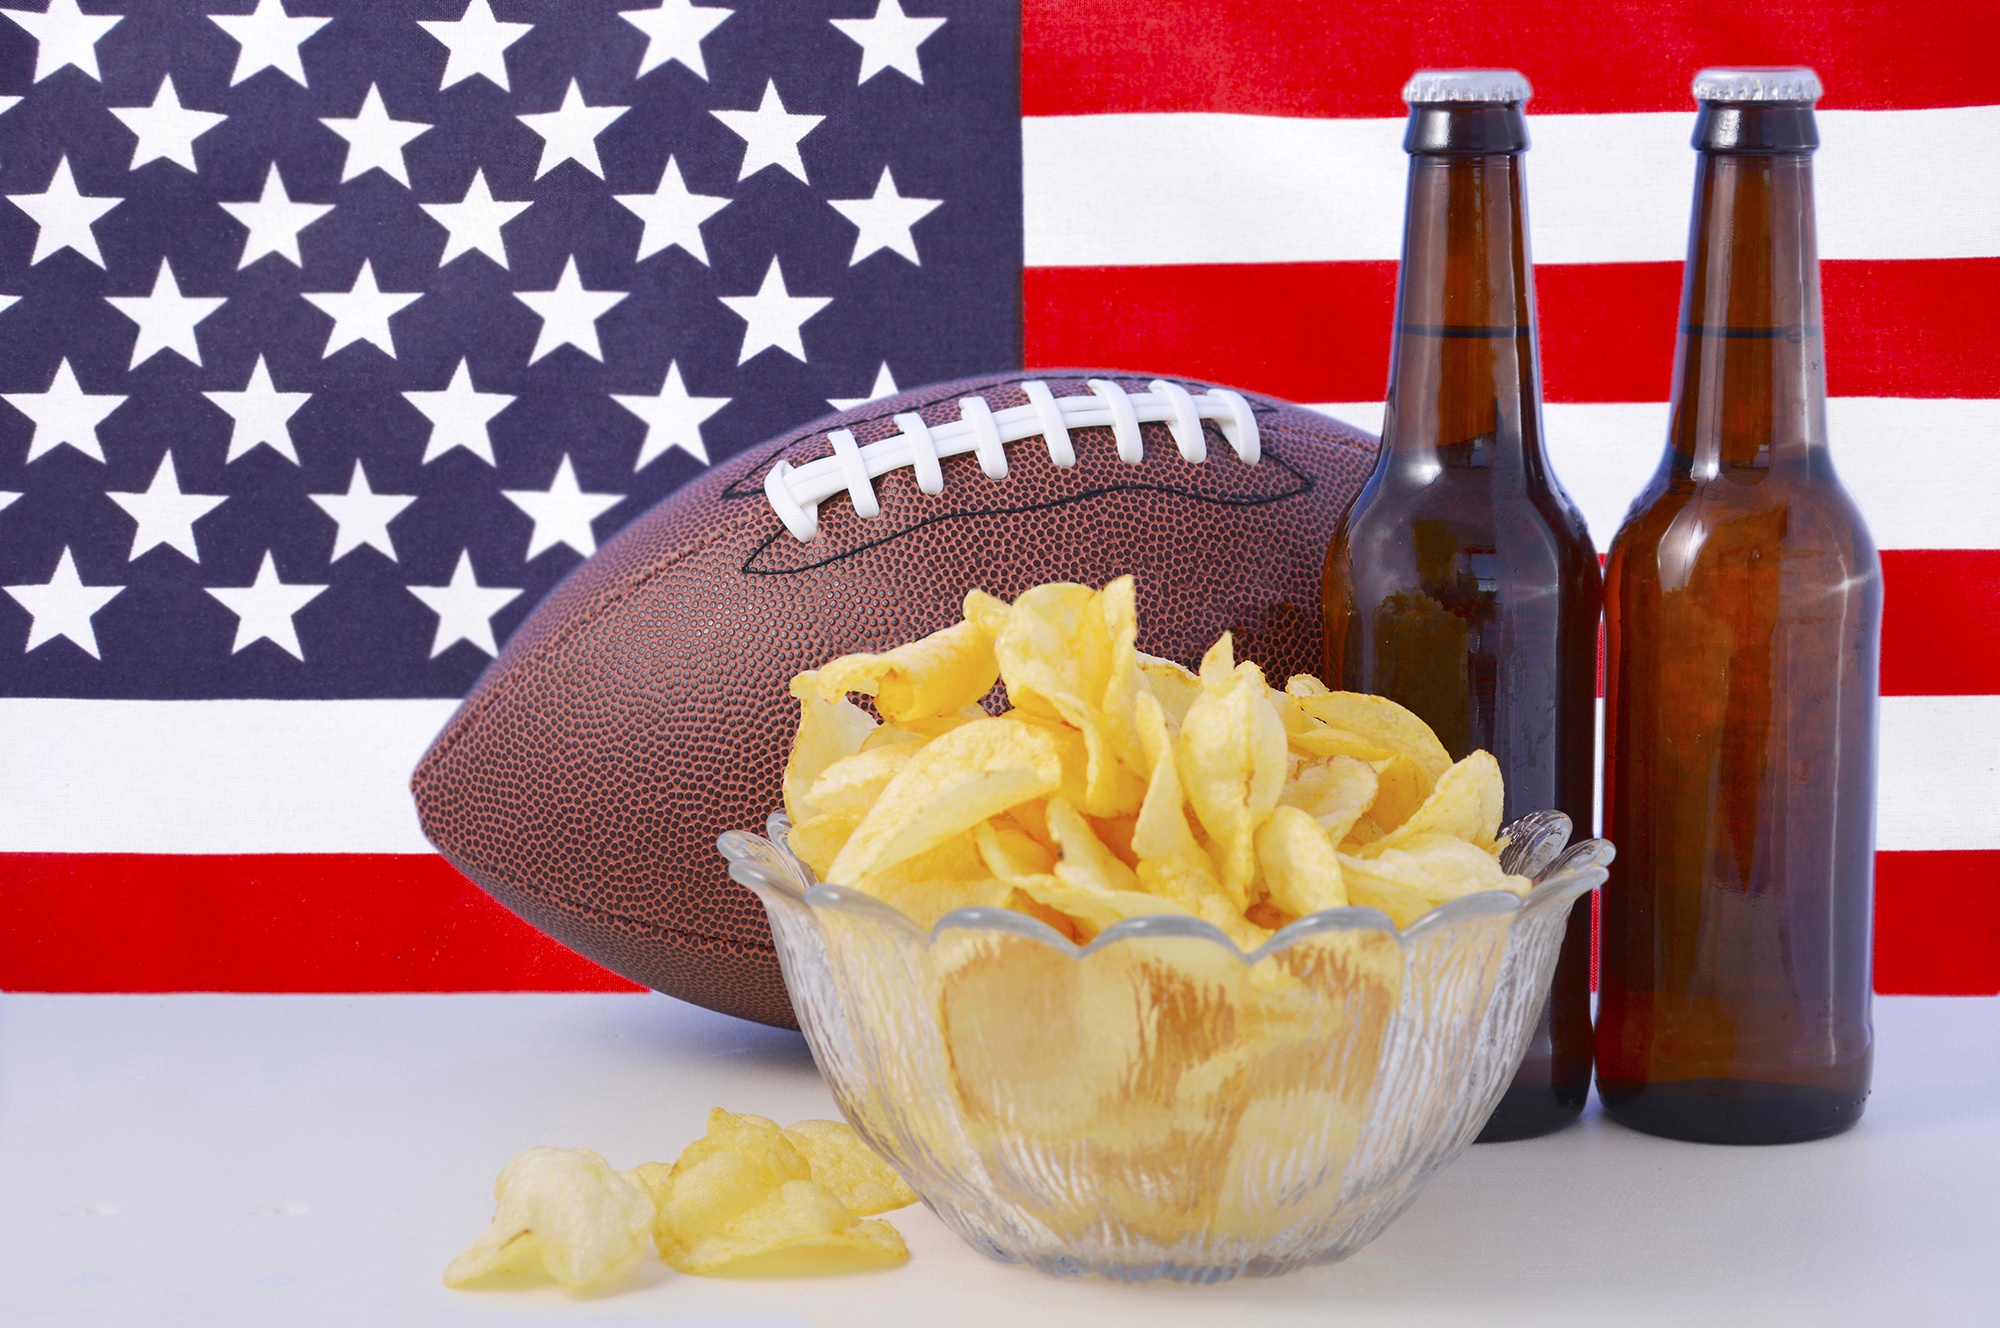 photography, still life, alcohol, american flag, ball, beer, chips images